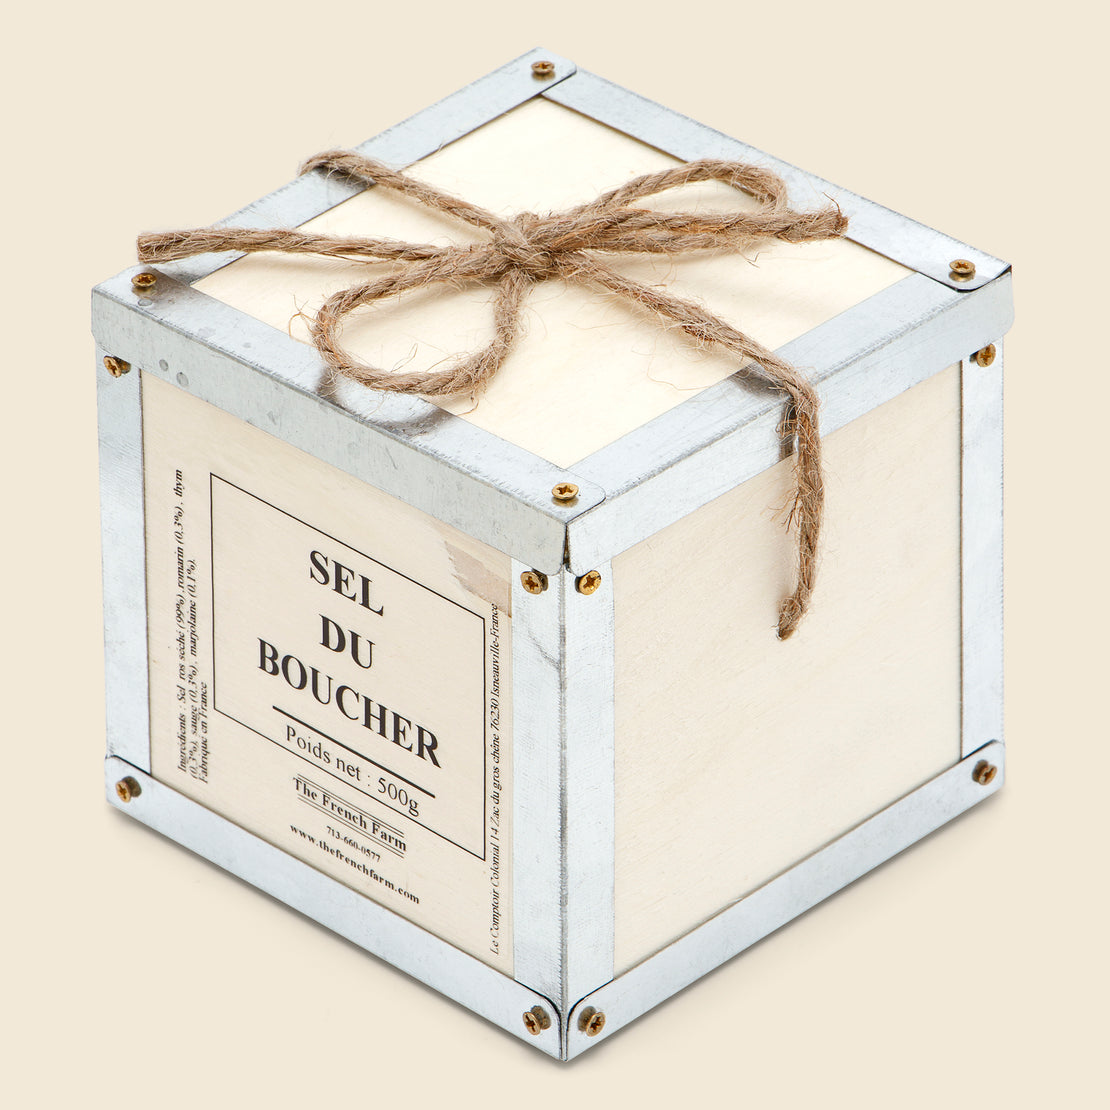 Butcher Salt Box - Home - STAG Provisions - Home - Kitchen - Cooking